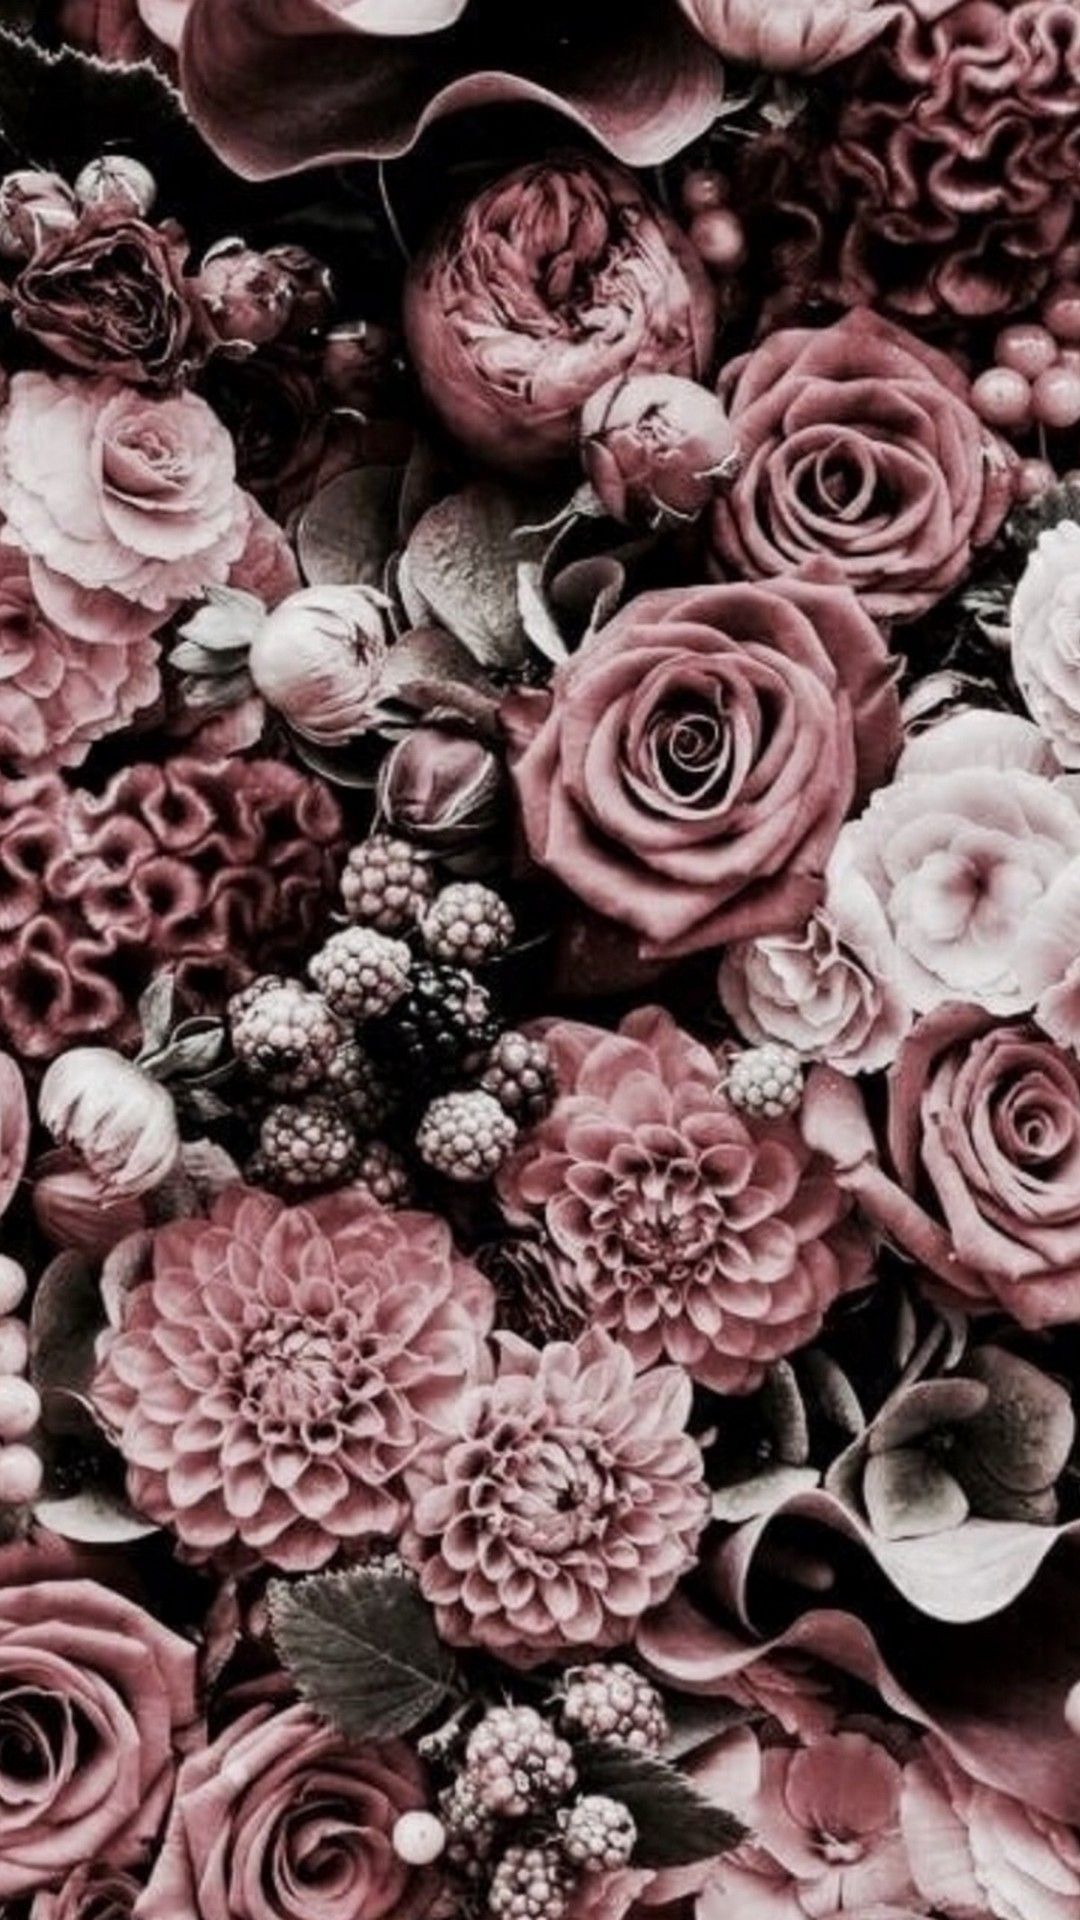 A bouquet of pink flowers, including roses and peonies, fill the image. The aesthetic is moody and romantic. - Rose gold, roses, garden